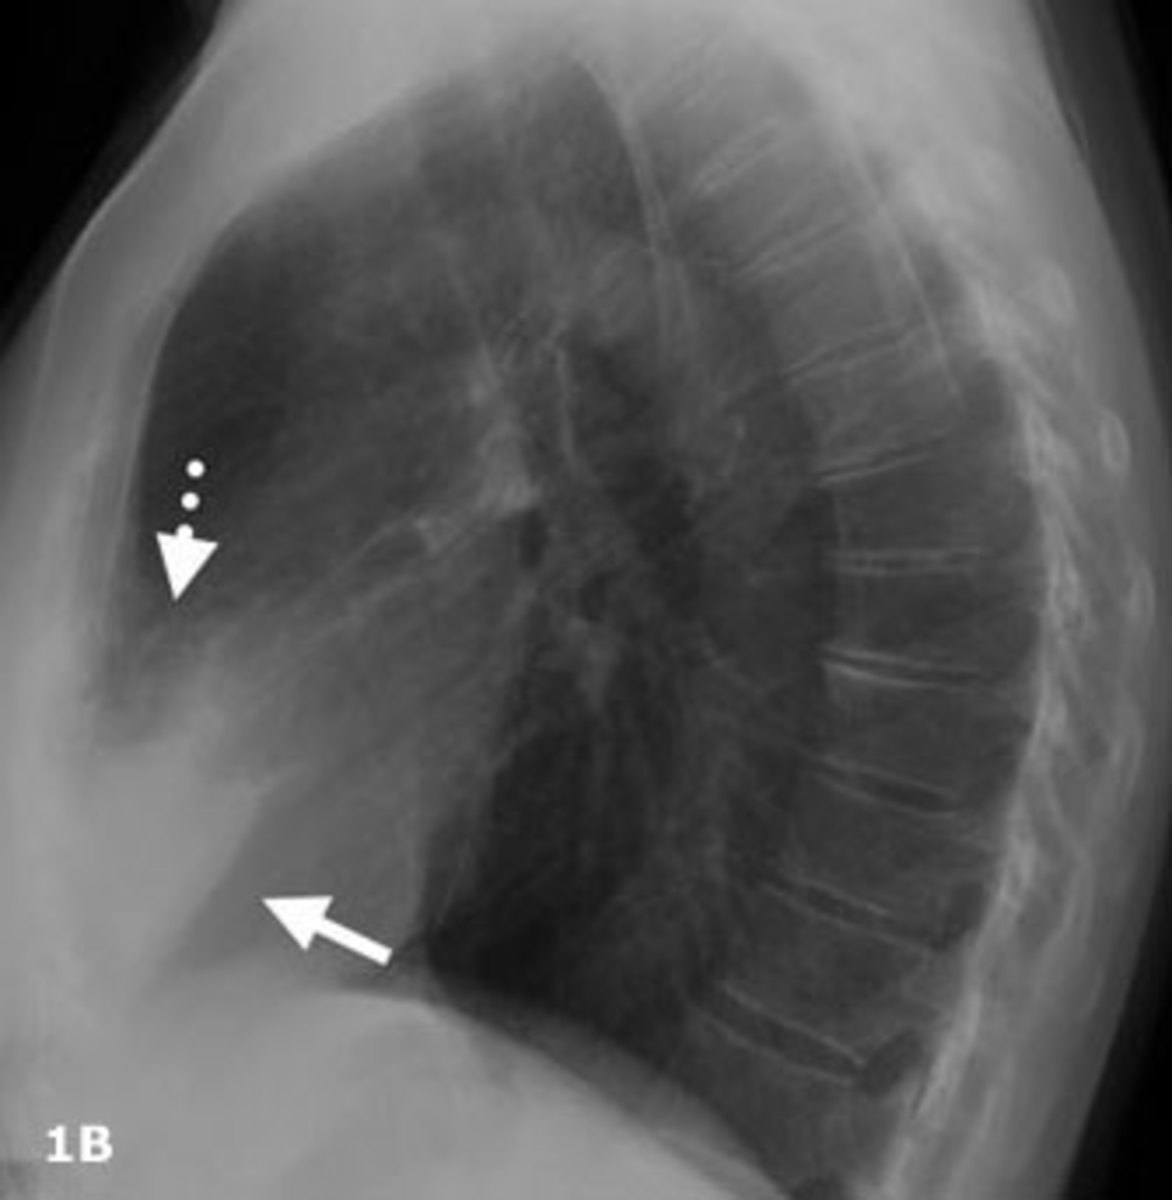 PA (1A) and Lateral chest (1B) radiographs in a 64 year old lady with a chronic cough secondary to MAC. There is air space opacity in the middle lobe (solid arrows) and lingula (dashed arrows)